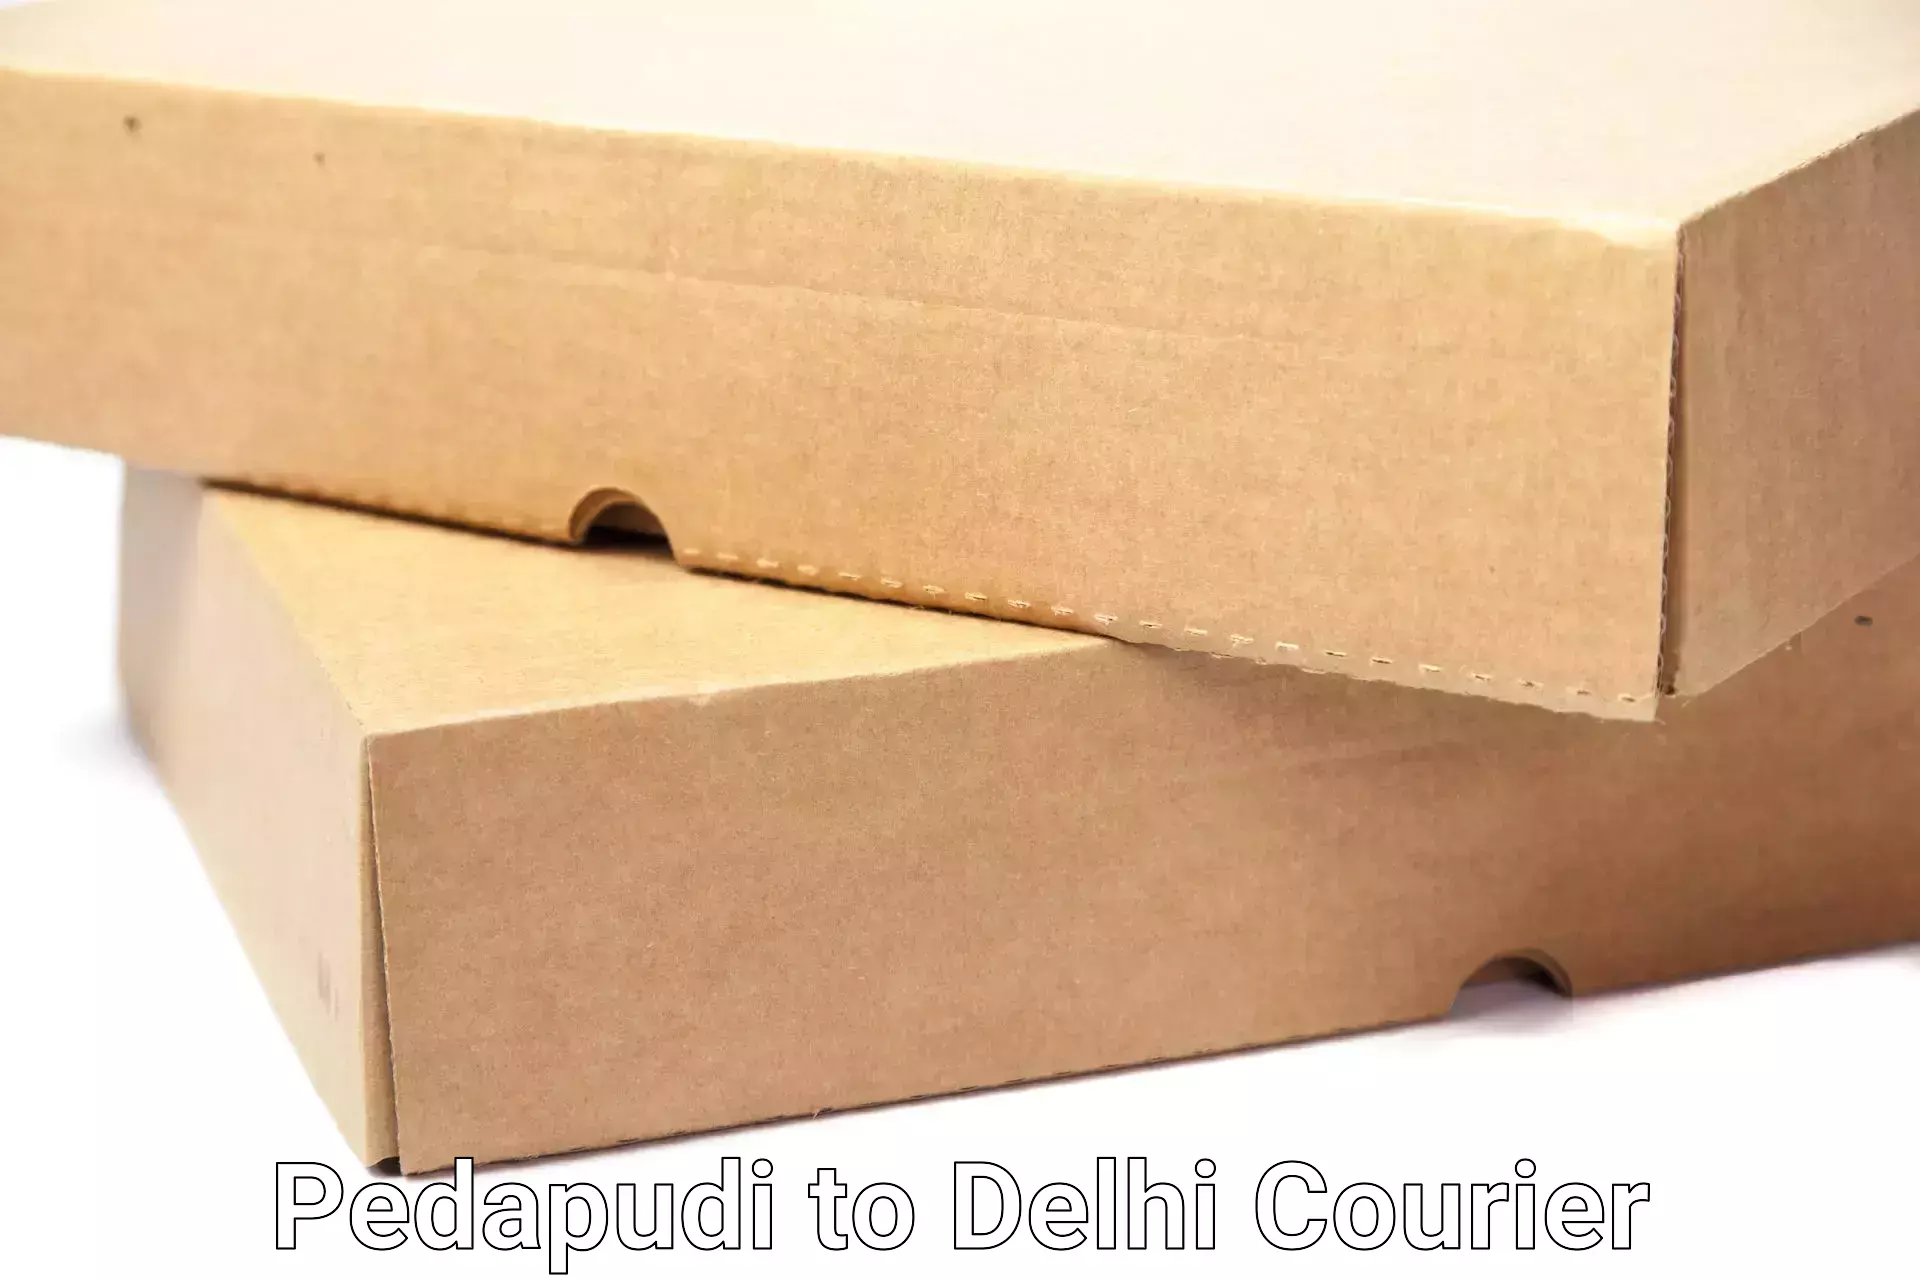 Trusted relocation experts in Pedapudi to Jawaharlal Nehru University New Delhi